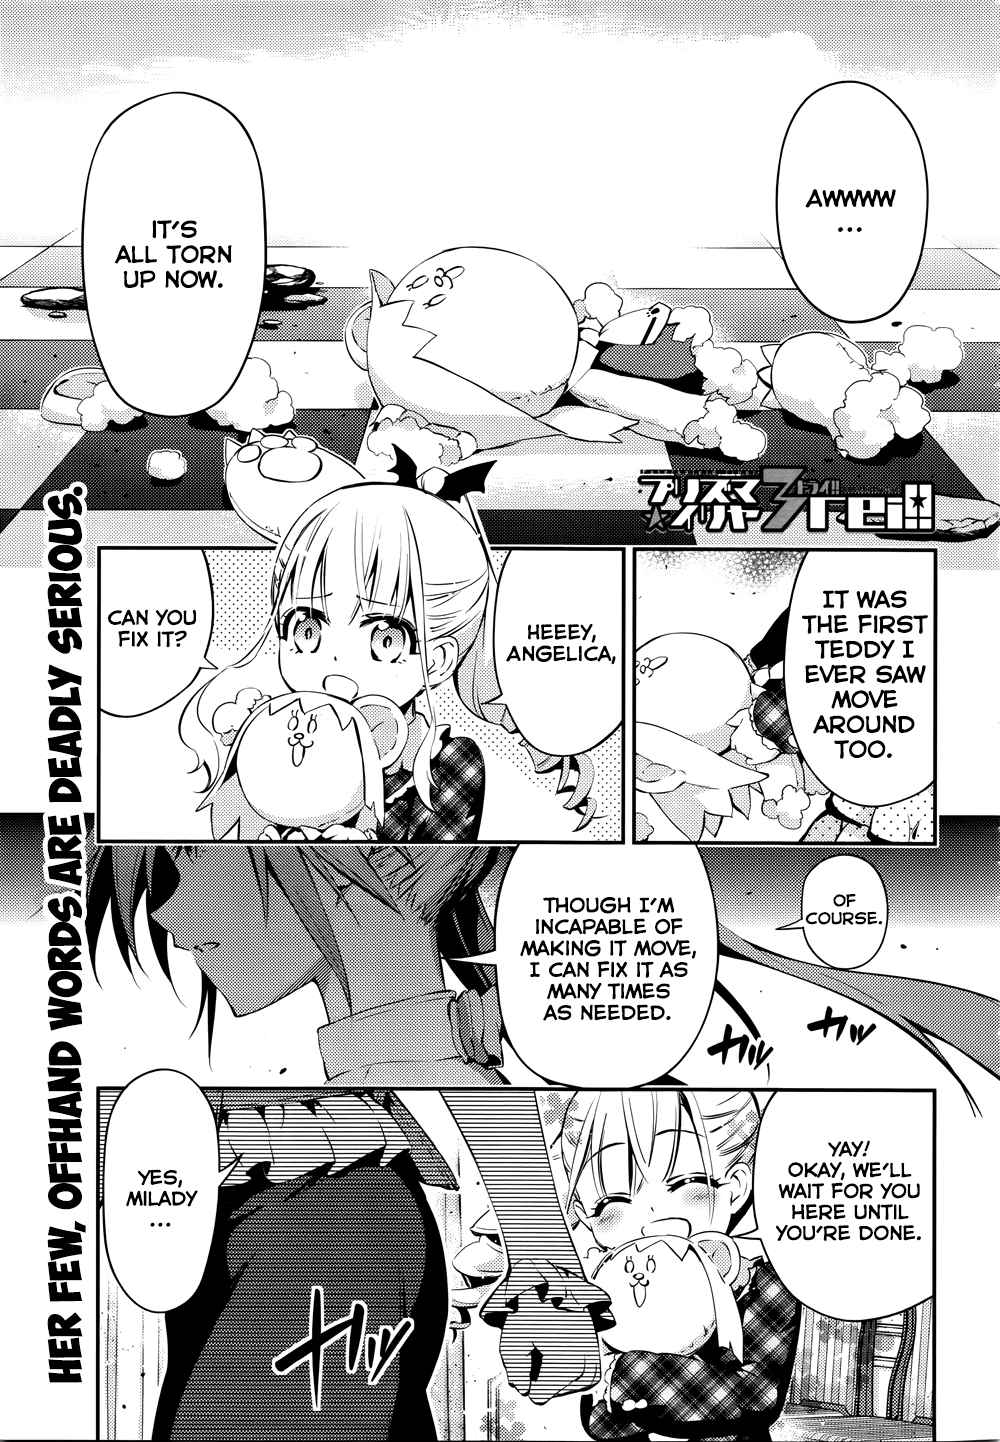 Fate/kaleid liner PRISMA☆ILLYA 3rei!! Vol. 4 Ch. 17 The Foreseen Eternity